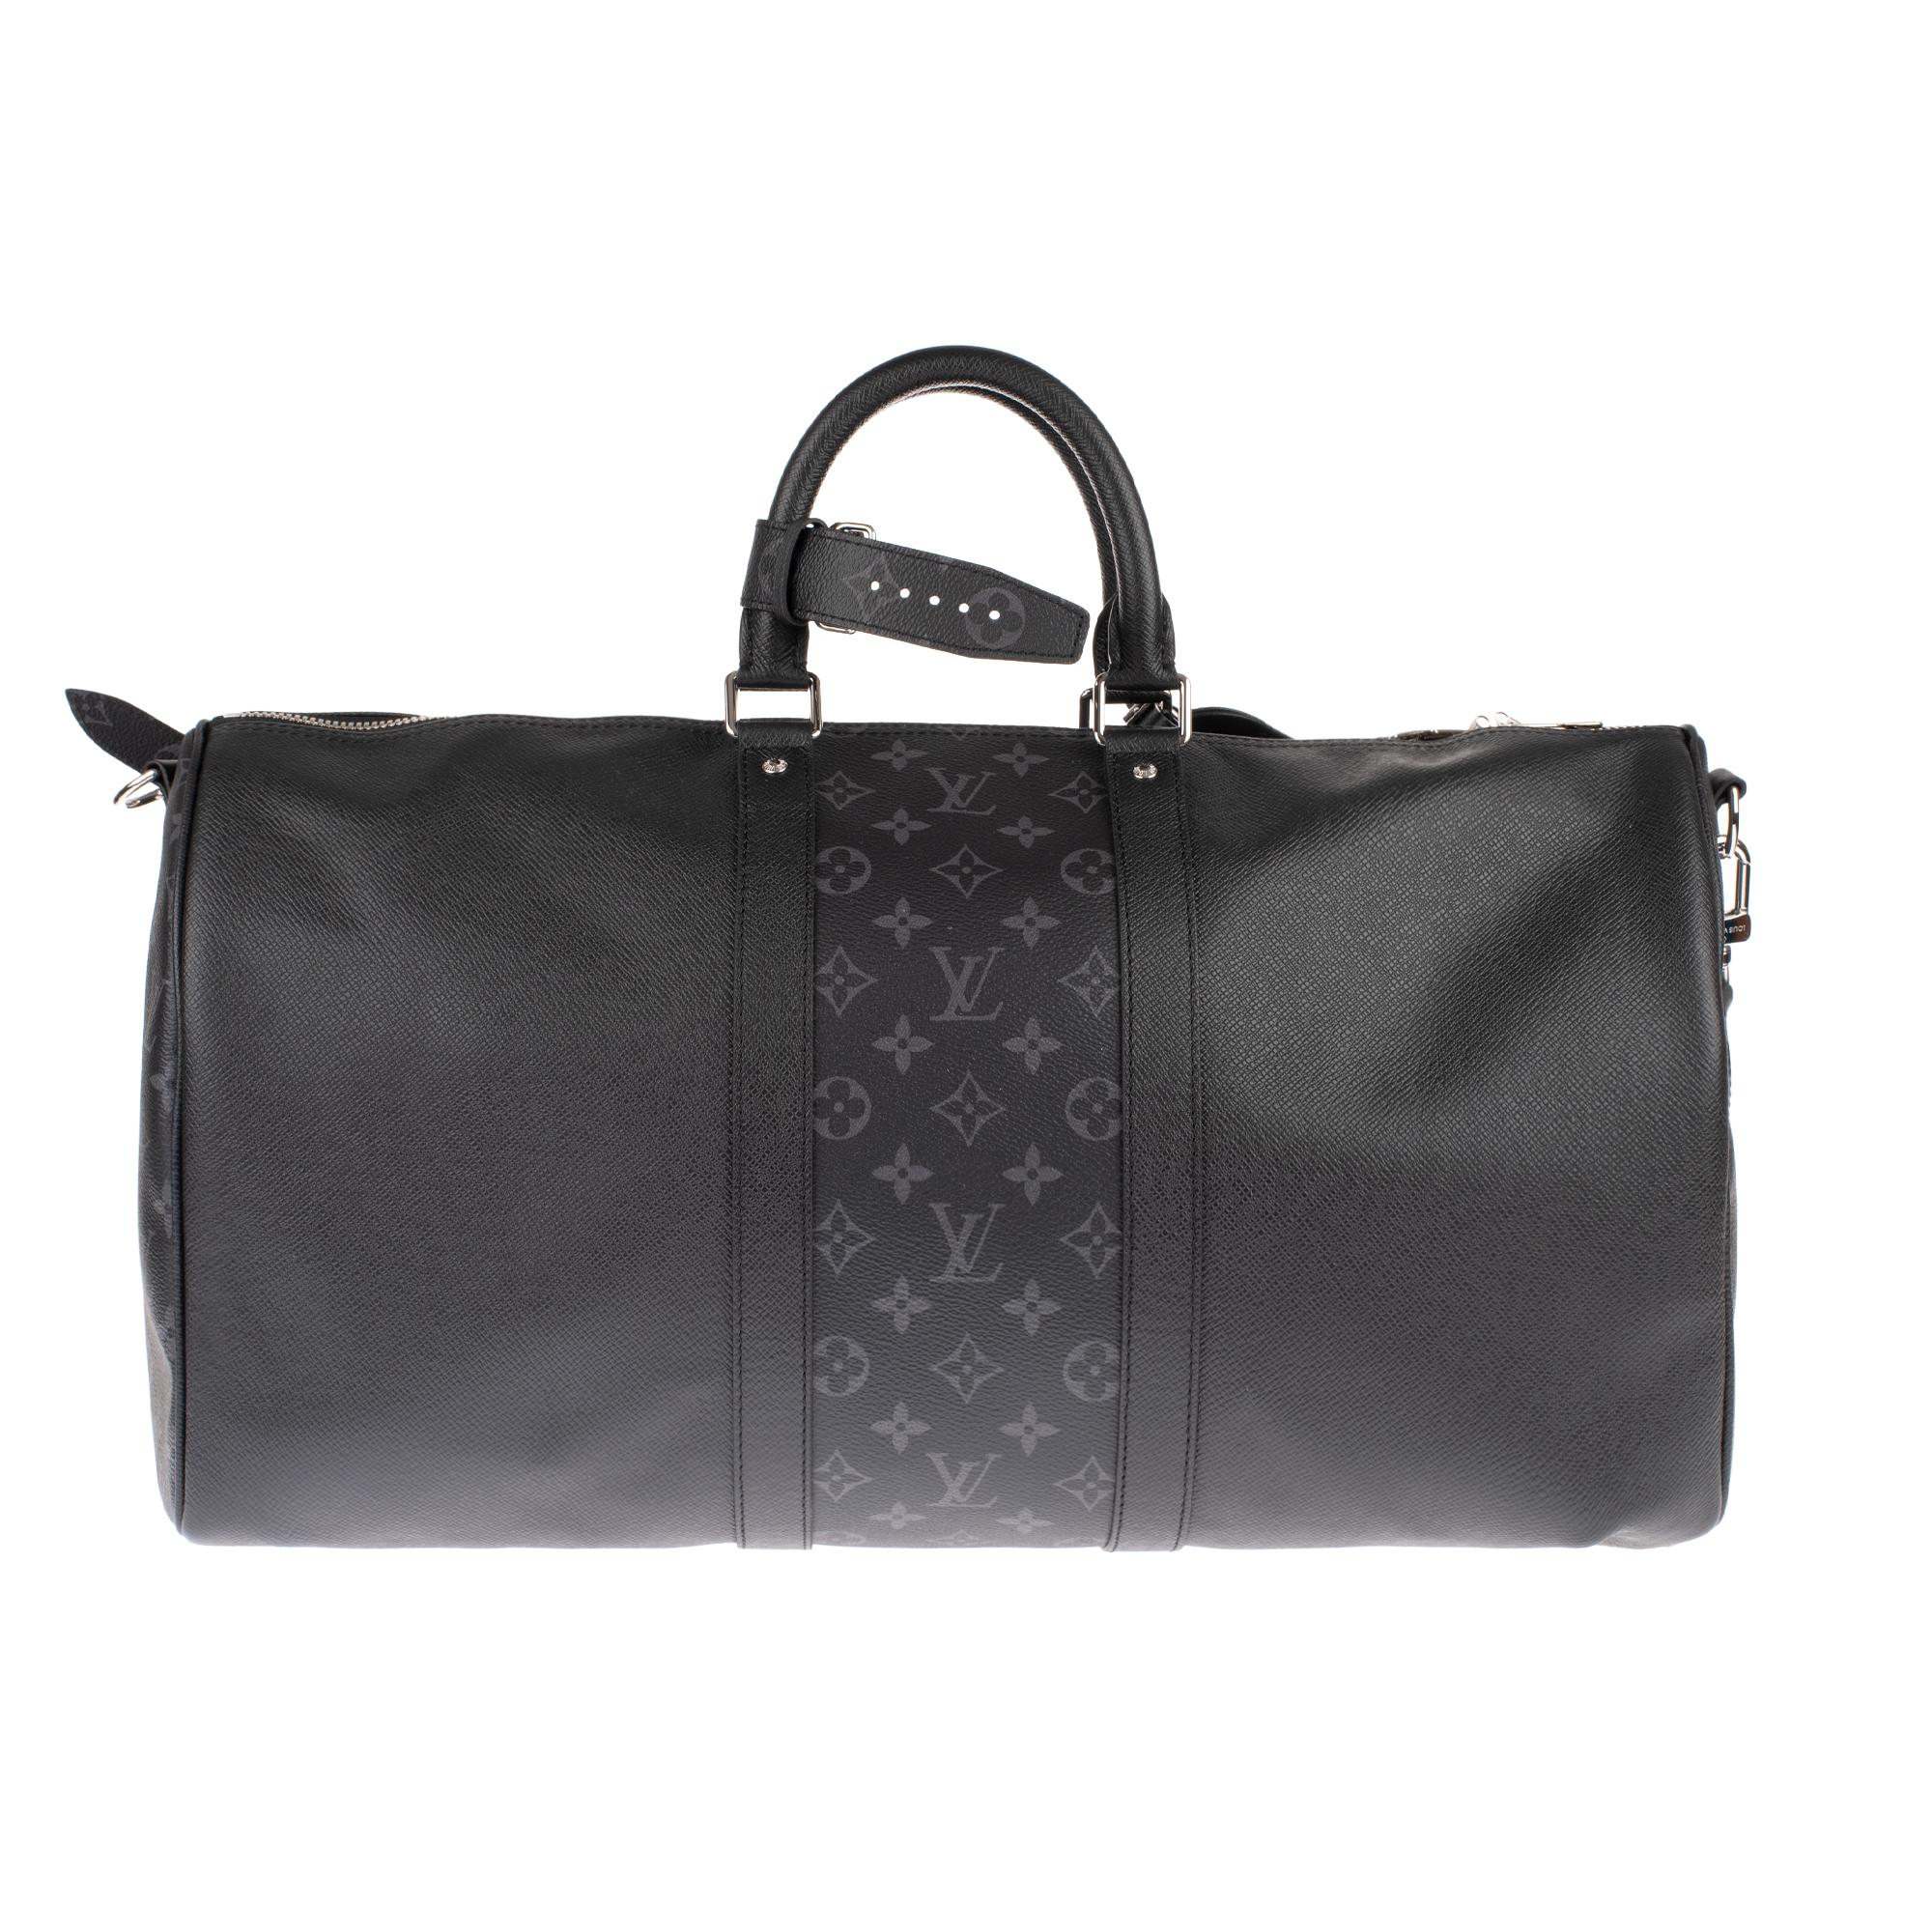 This sublime and rare Keepall 50 Shoulder Strap takes on a new look for the 2019 Spring-Summer season.
Its monochrome design turns out to be in a nuanced color that combines Monogram canvas and soft Taiga leather. This lightweight bag offers